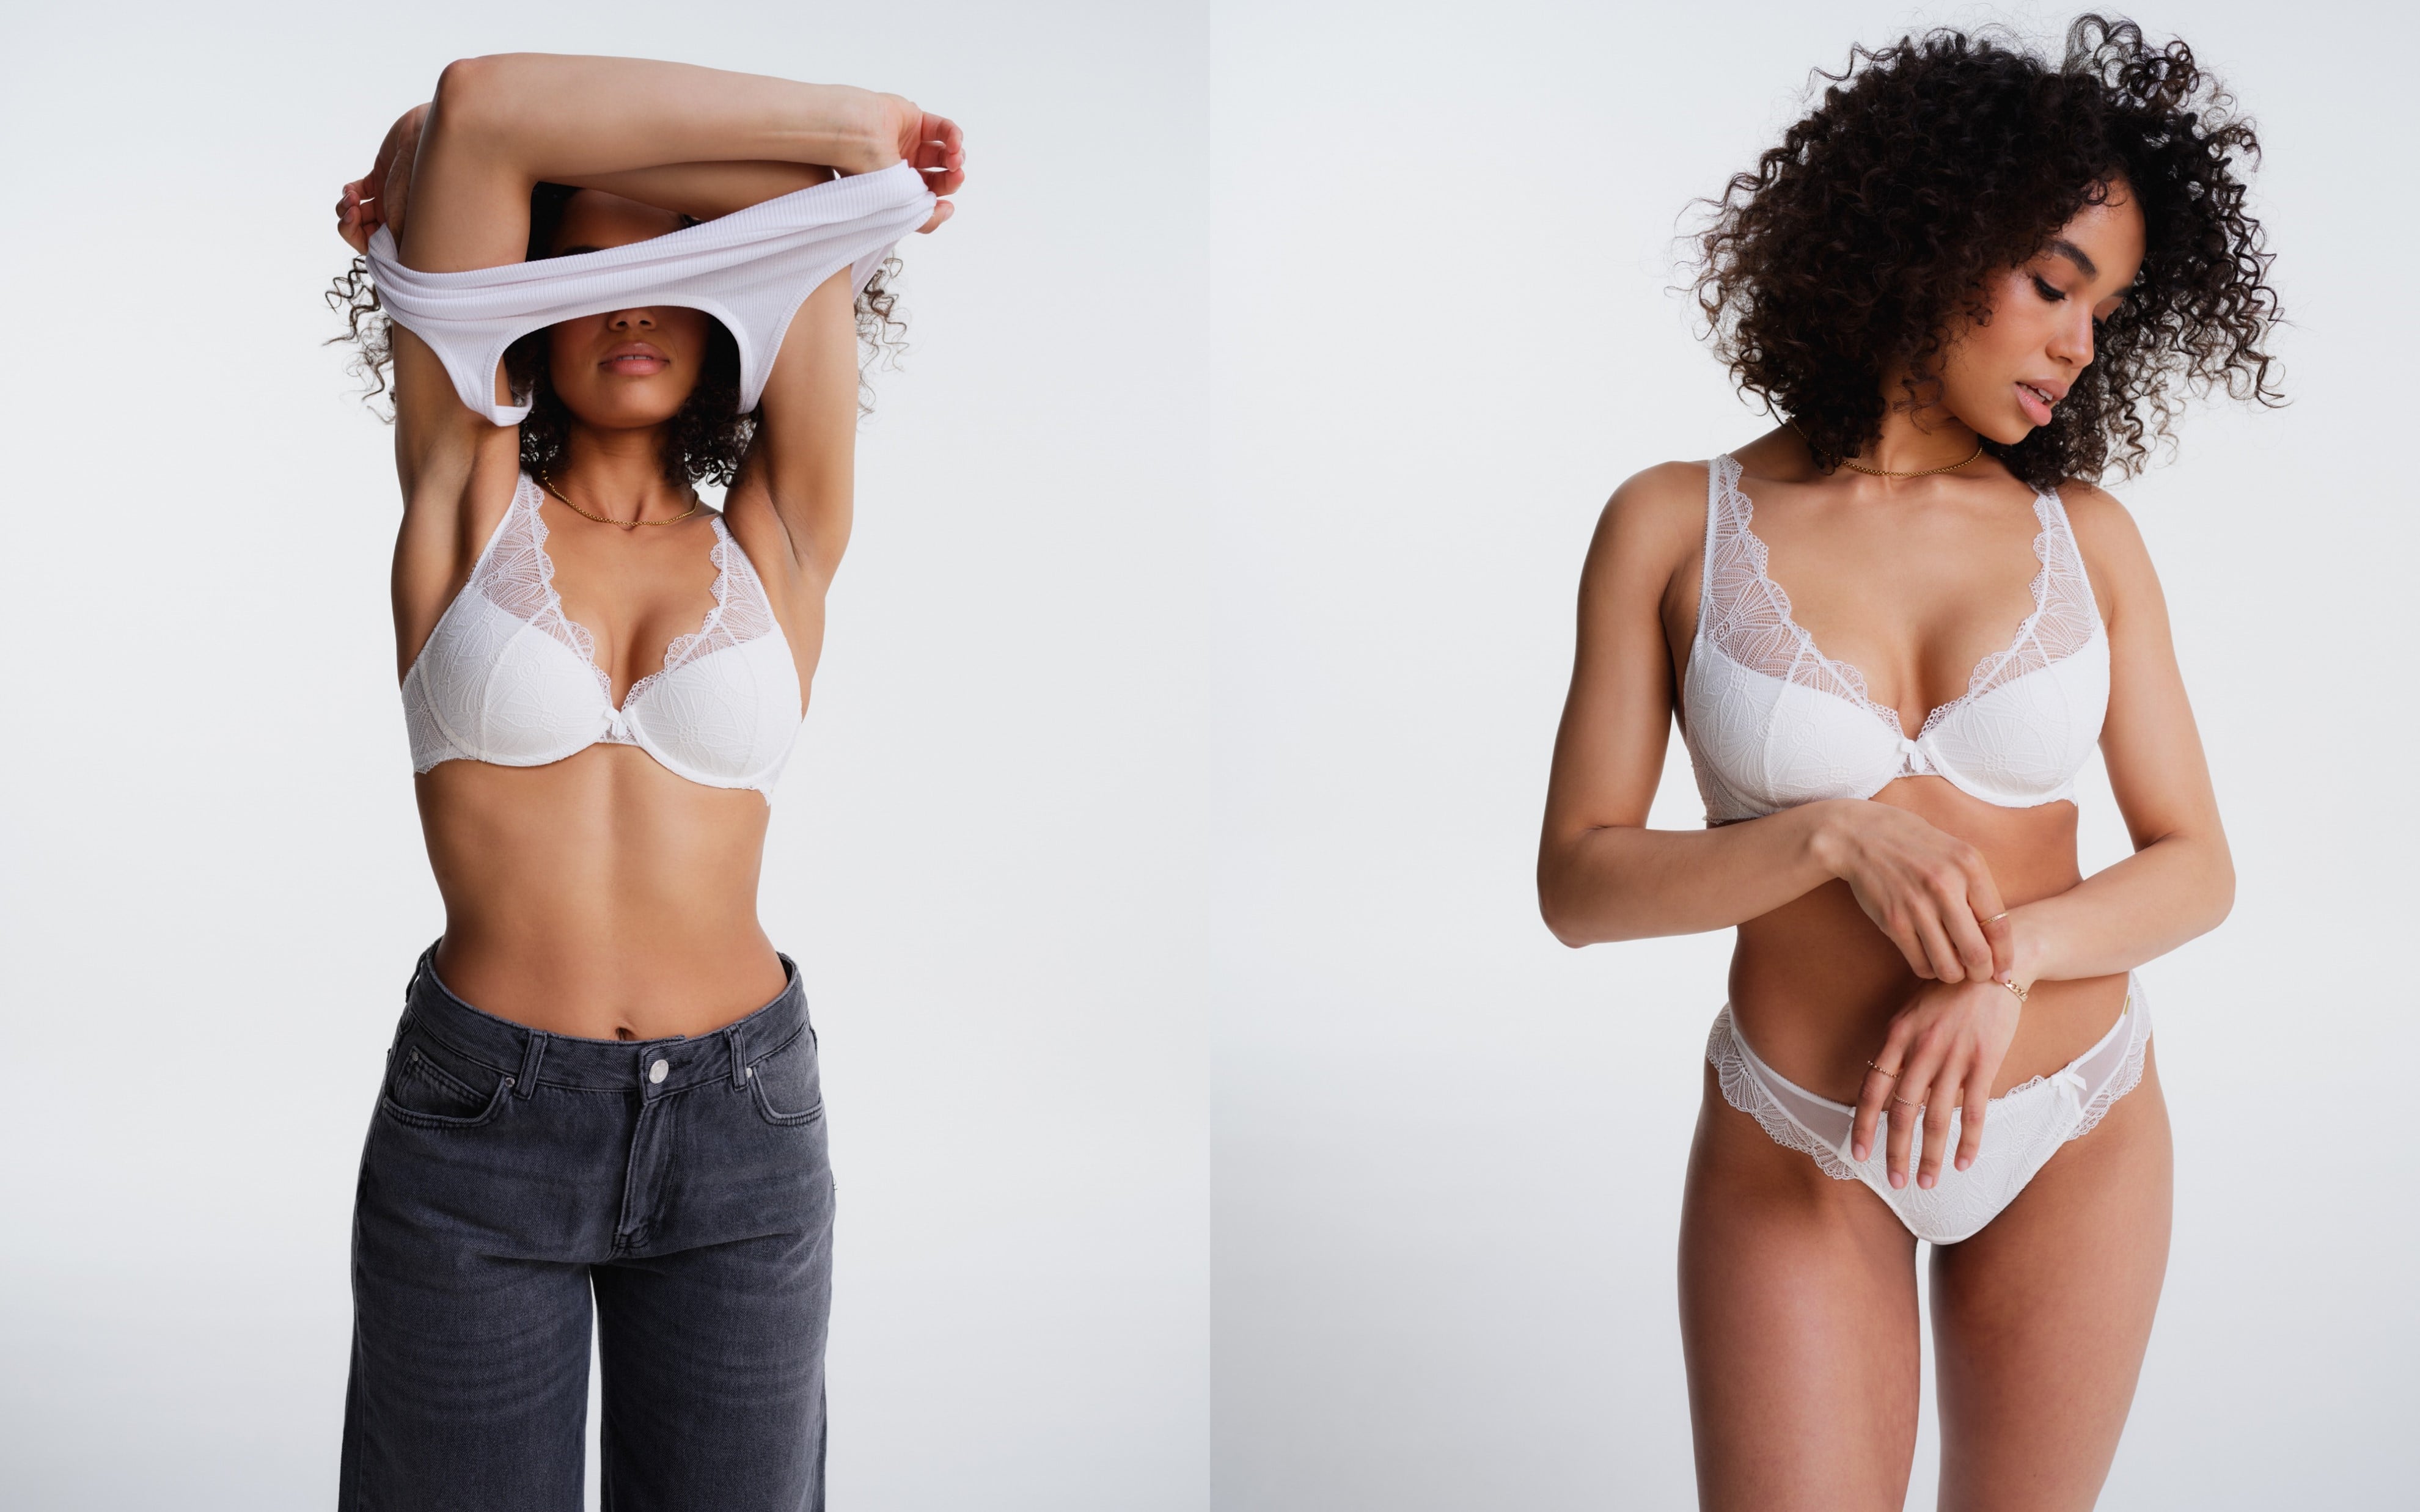 Does your bra change size with washing and drying it over time? The  dangerous effect wearing the wrong size bra can have on your boobs